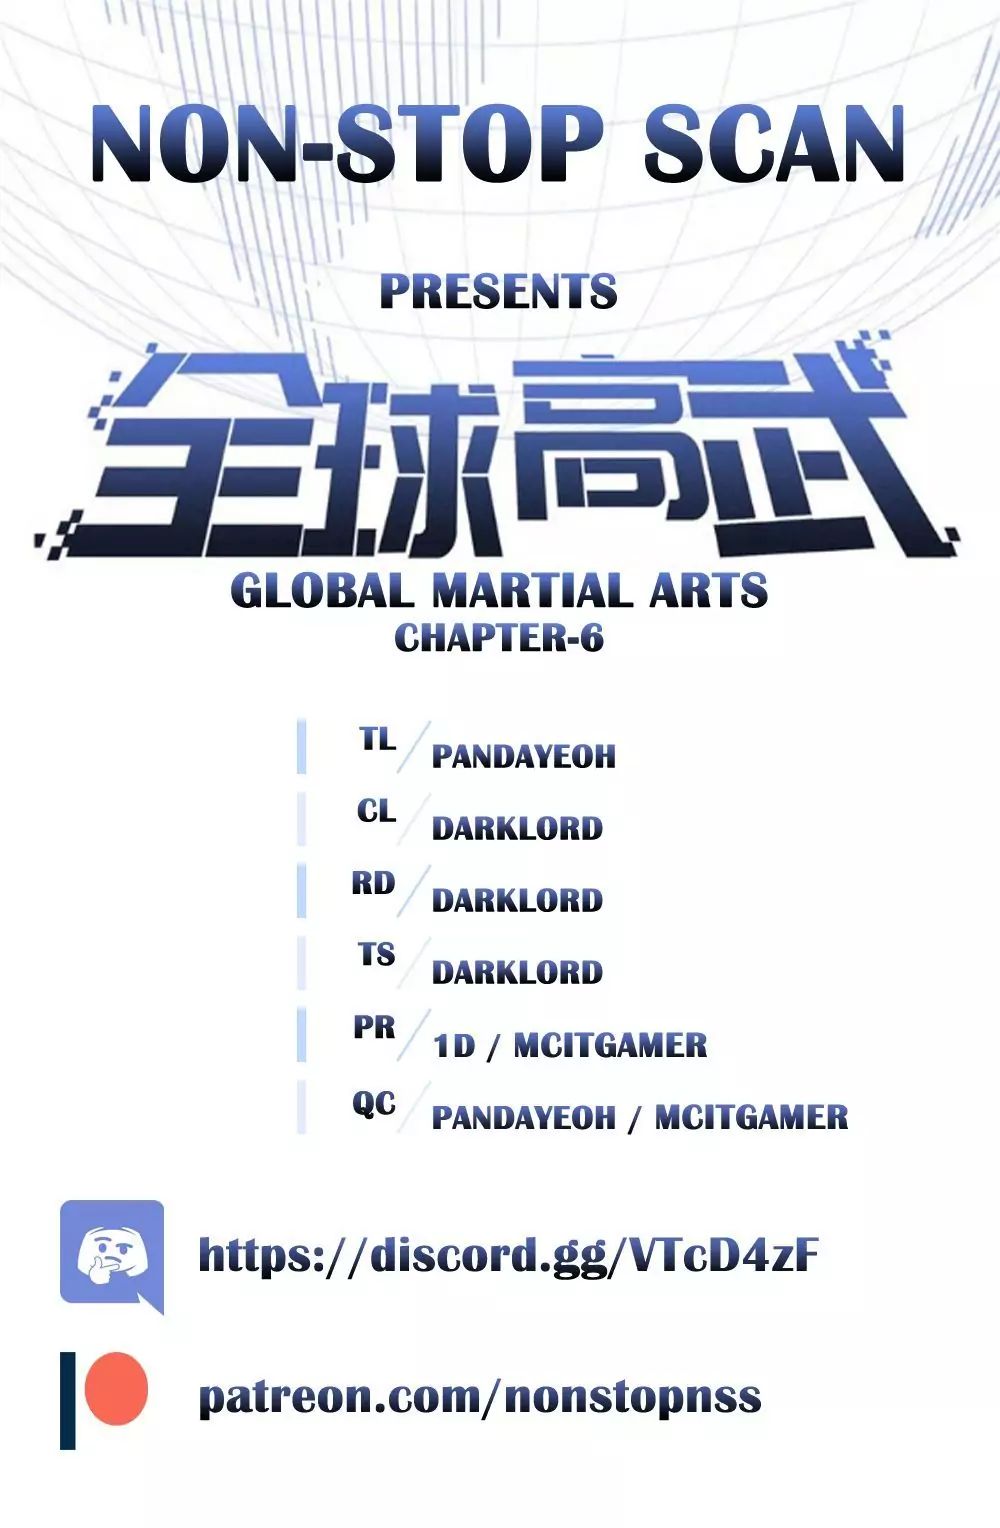 Global Martial Arts Chapter 6